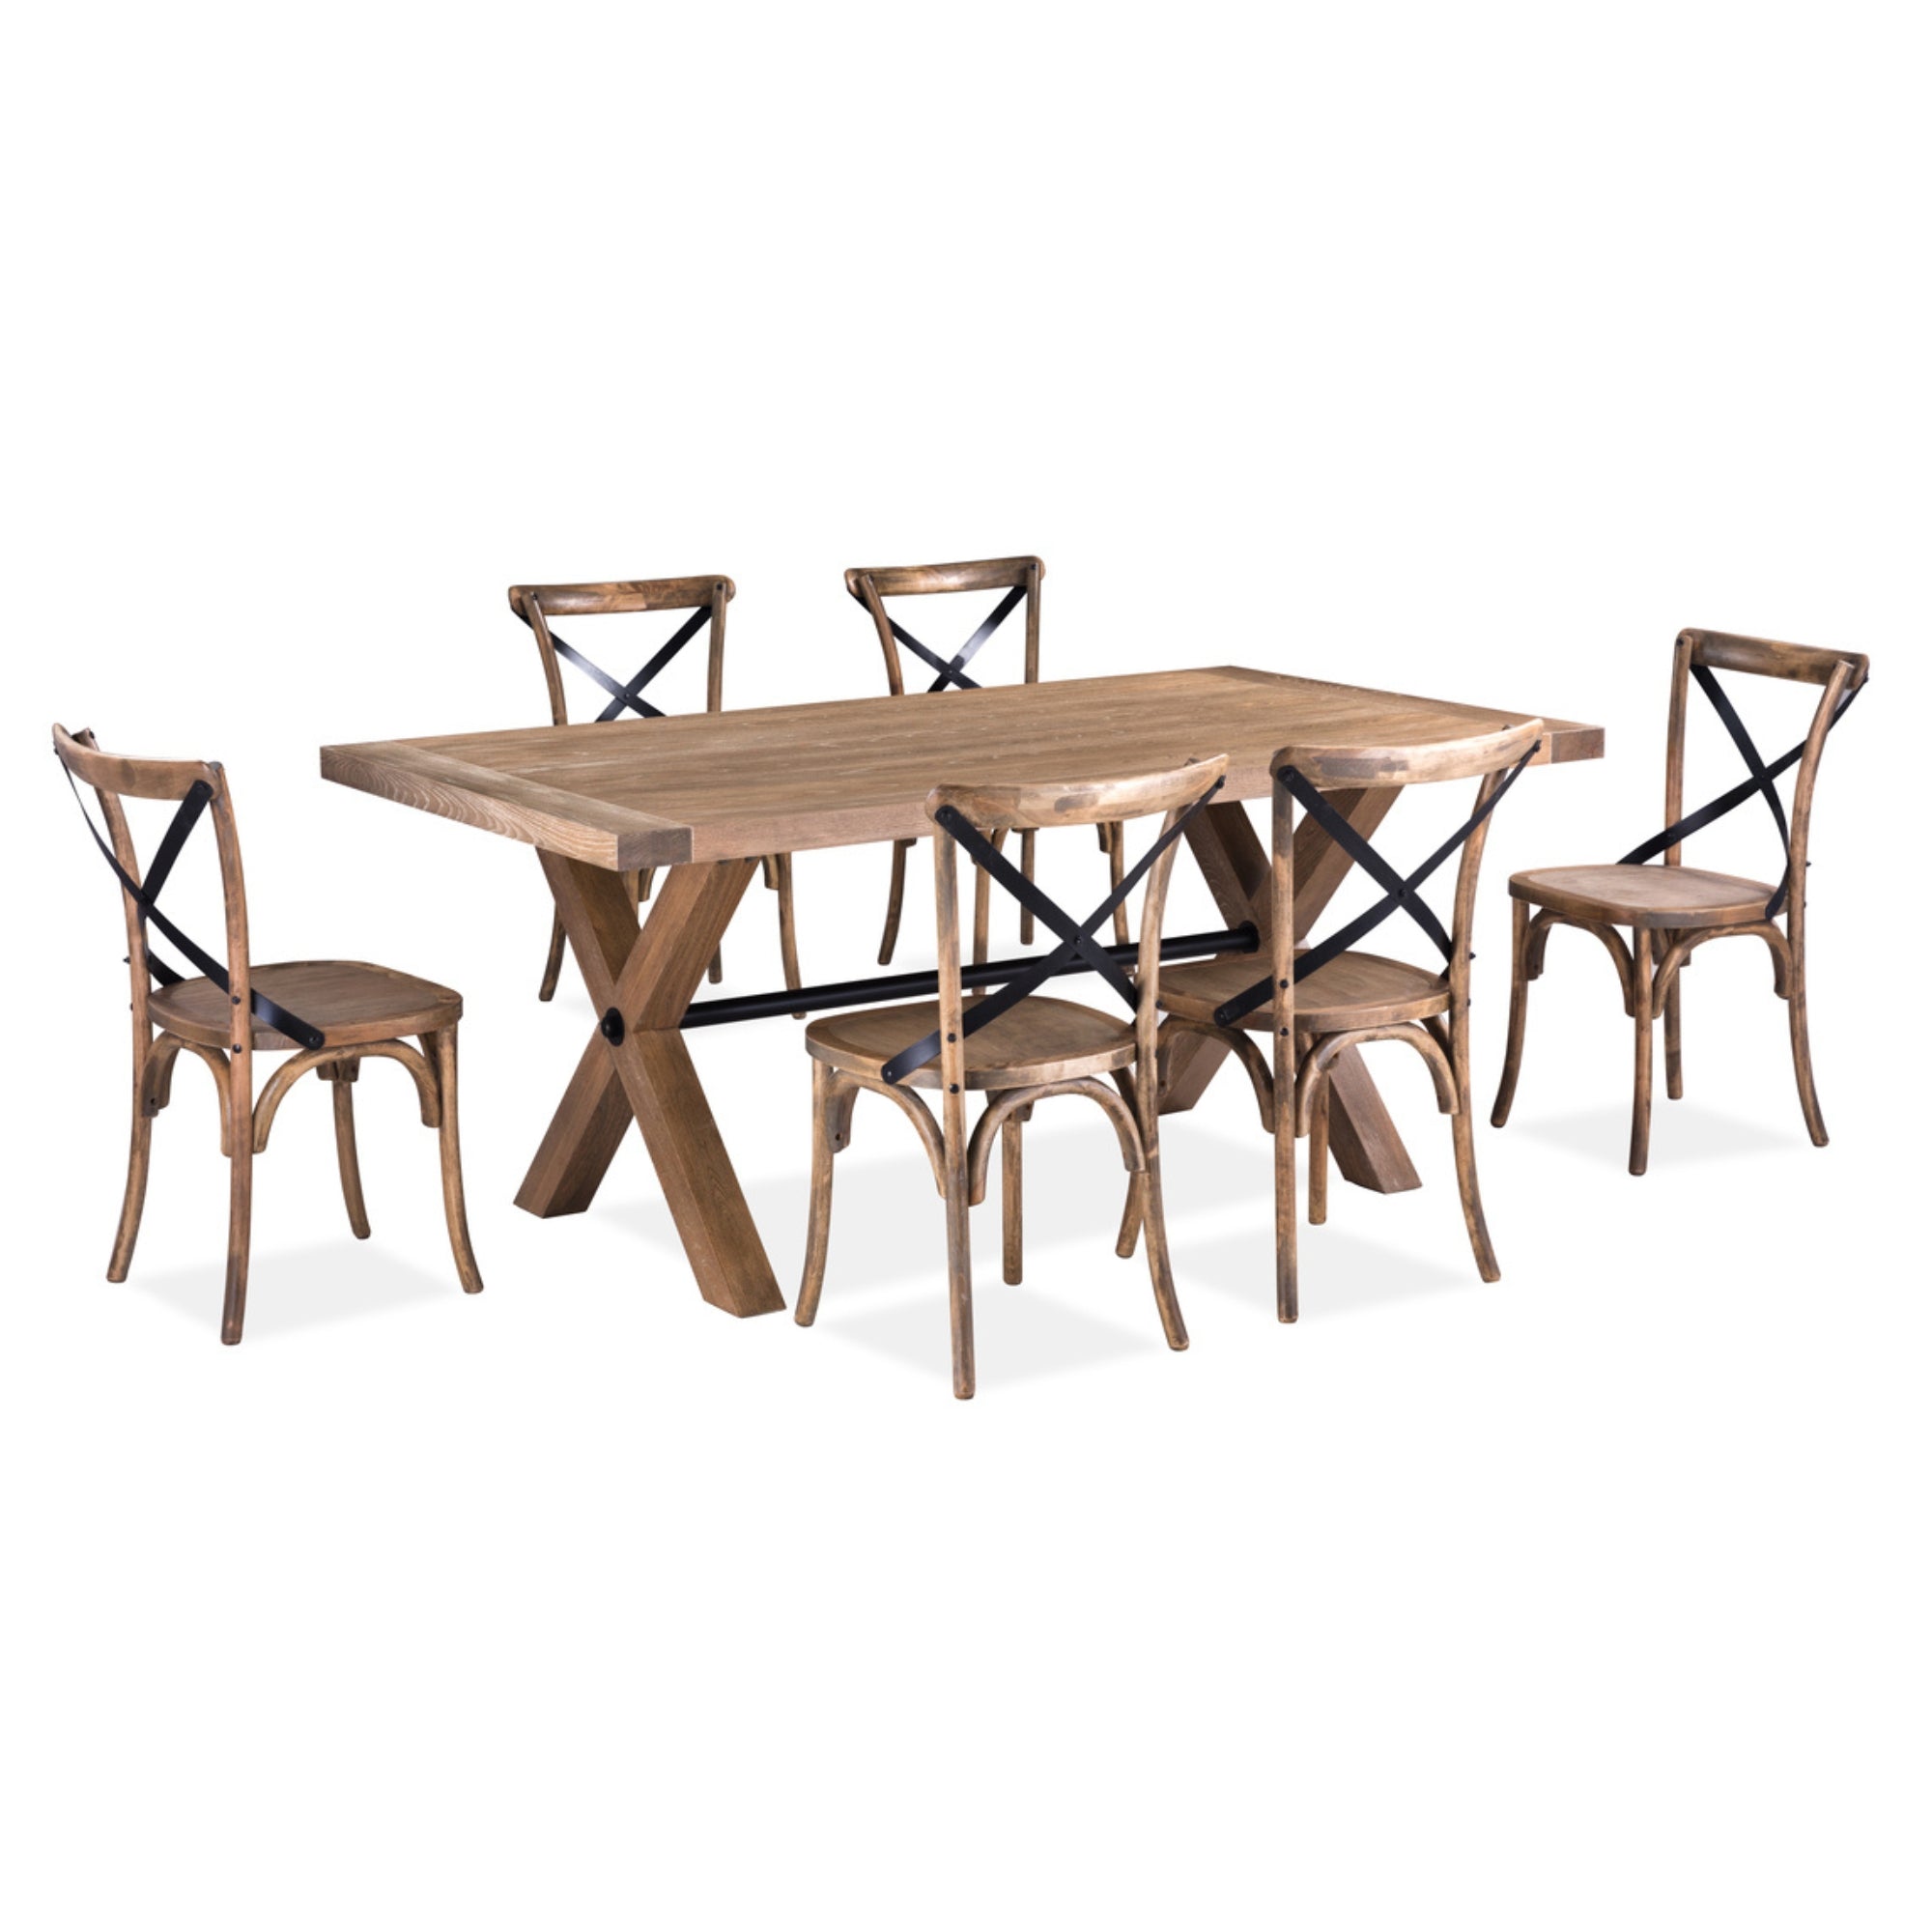 Natural Wood 7pc Dining Set, 6 X-Back Chairs, Refectory Style